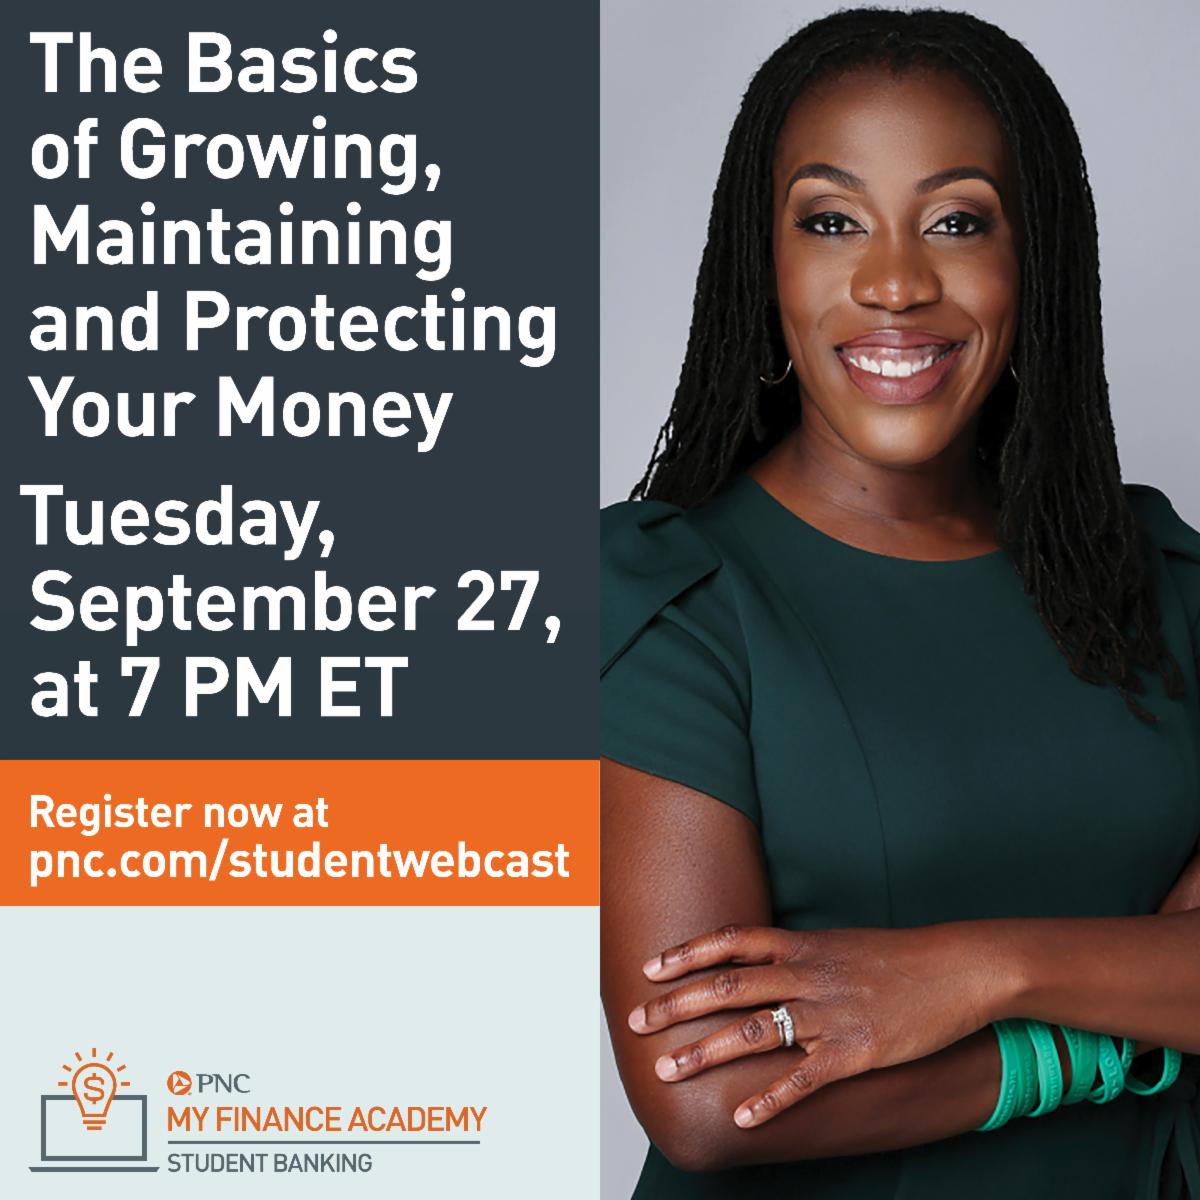 PNC is offering a free webinar tomorrow at 7pm on the Basics of Growing, Maintaining, and Protecting your Money. Hear tips from Tiffany Aliche on investing, saving, budgeting, and managing your credit wisely. 💰 Register now at conta.cc/3UGTxun